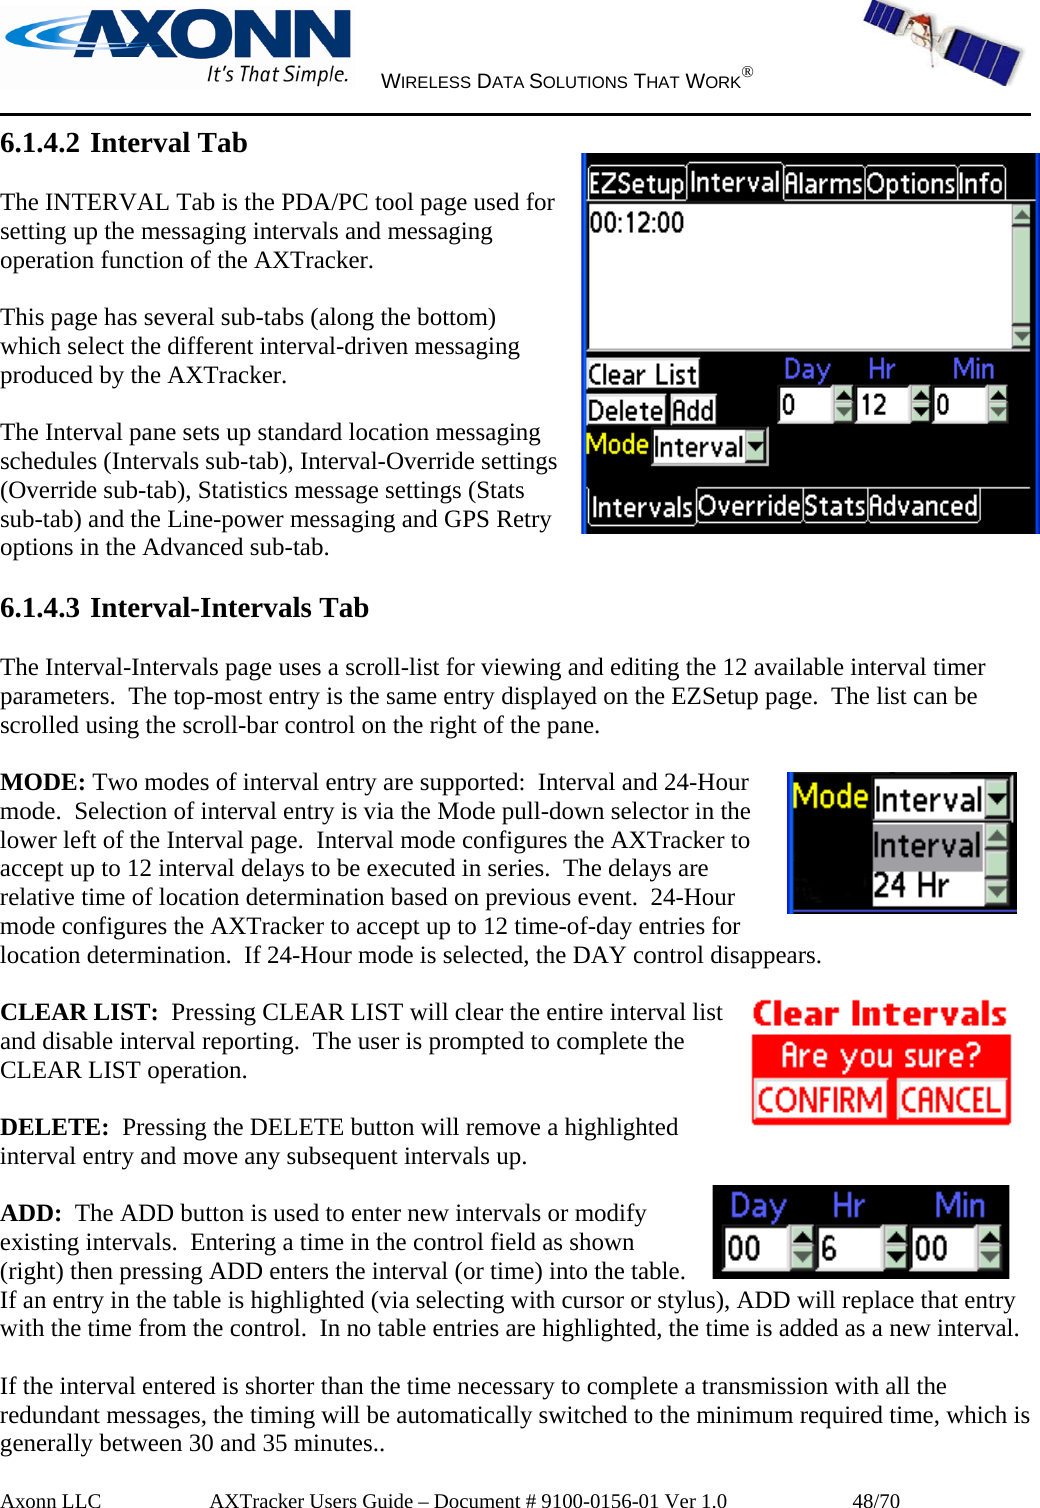     WIRELESS DATA SOLUTIONS THAT WORK®   Axonn LLC         AXTracker Users Guide – Document # 9100-0156-01 Ver 1.0                  48/70 6.1.4.2 Interval Tab  The INTERVAL Tab is the PDA/PC tool page used for setting up the messaging intervals and messaging operation function of the AXTracker.    This page has several sub-tabs (along the bottom) which select the different interval-driven messaging produced by the AXTracker.  The Interval pane sets up standard location messaging schedules (Intervals sub-tab), Interval-Override settings (Override sub-tab), Statistics message settings (Stats sub-tab) and the Line-power messaging and GPS Retry options in the Advanced sub-tab.  6.1.4.3 Interval-Intervals Tab  The Interval-Intervals page uses a scroll-list for viewing and editing the 12 available interval timer parameters.  The top-most entry is the same entry displayed on the EZSetup page.  The list can be scrolled using the scroll-bar control on the right of the pane.    MODE: Two modes of interval entry are supported:  Interval and 24-Hour mode.  Selection of interval entry is via the Mode pull-down selector in the lower left of the Interval page.  Interval mode configures the AXTracker to accept up to 12 interval delays to be executed in series.  The delays are relative time of location determination based on previous event.  24-Hour mode configures the AXTracker to accept up to 12 time-of-day entries for location determination.  If 24-Hour mode is selected, the DAY control disappears.  CLEAR LIST:  Pressing CLEAR LIST will clear the entire interval list and disable interval reporting.  The user is prompted to complete the CLEAR LIST operation.   DELETE:  Pressing the DELETE button will remove a highlighted interval entry and move any subsequent intervals up.  ADD:  The ADD button is used to enter new intervals or modify existing intervals.  Entering a time in the control field as shown (right) then pressing ADD enters the interval (or time) into the table.  If an entry in the table is highlighted (via selecting with cursor or stylus), ADD will replace that entry with the time from the control.  In no table entries are highlighted, the time is added as a new interval.    If the interval entered is shorter than the time necessary to complete a transmission with all the redundant messages, the timing will be automatically switched to the minimum required time, which is generally between 30 and 35 minutes.. 